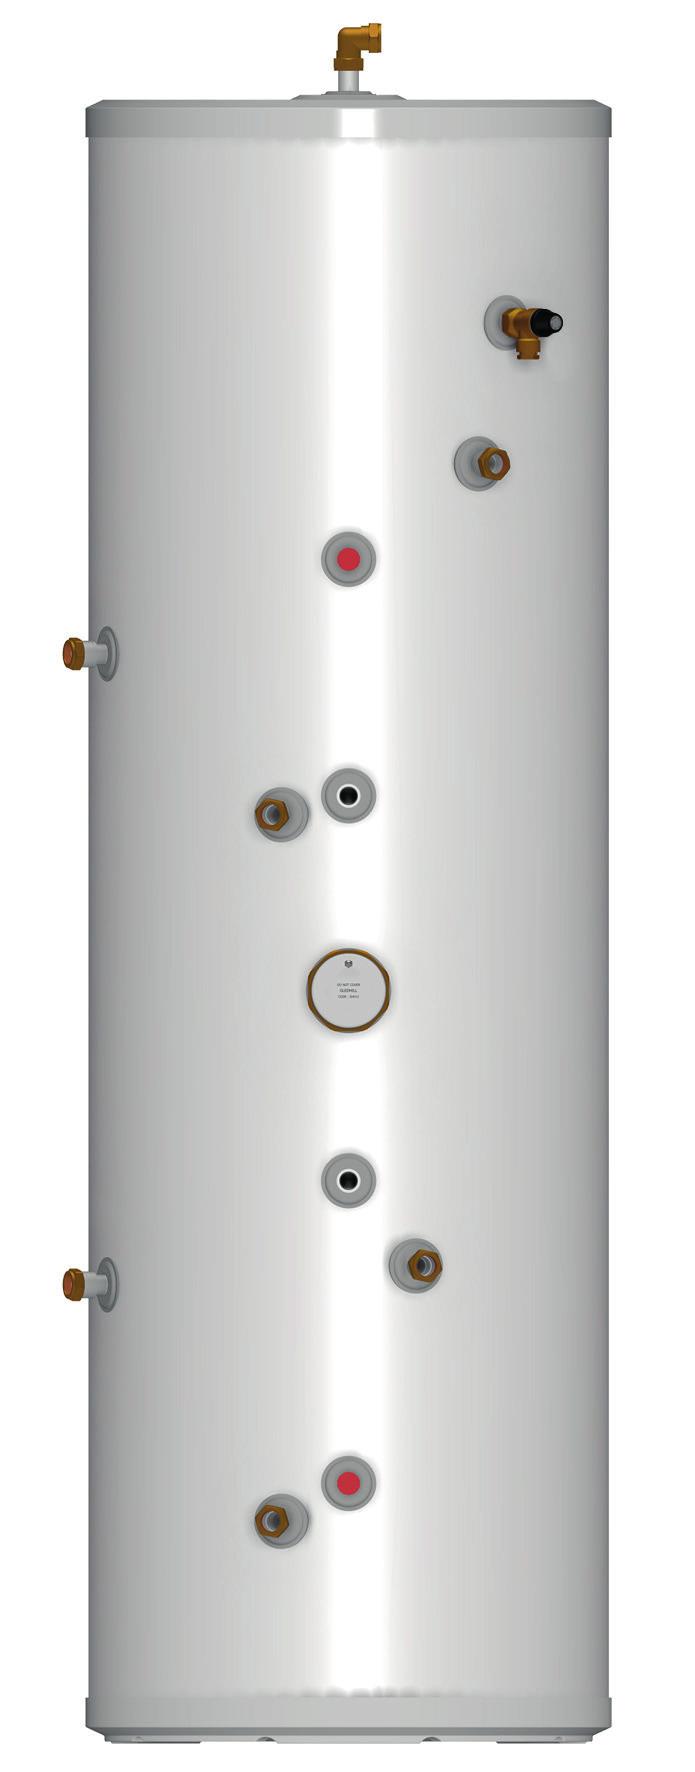 DESIGN Figure 2 Thermstore Indirect Solar Thermstore Indirect Solar is an unvented hot water storage cylinder and is provided with a high efficiency internal primary coil which is designed for use